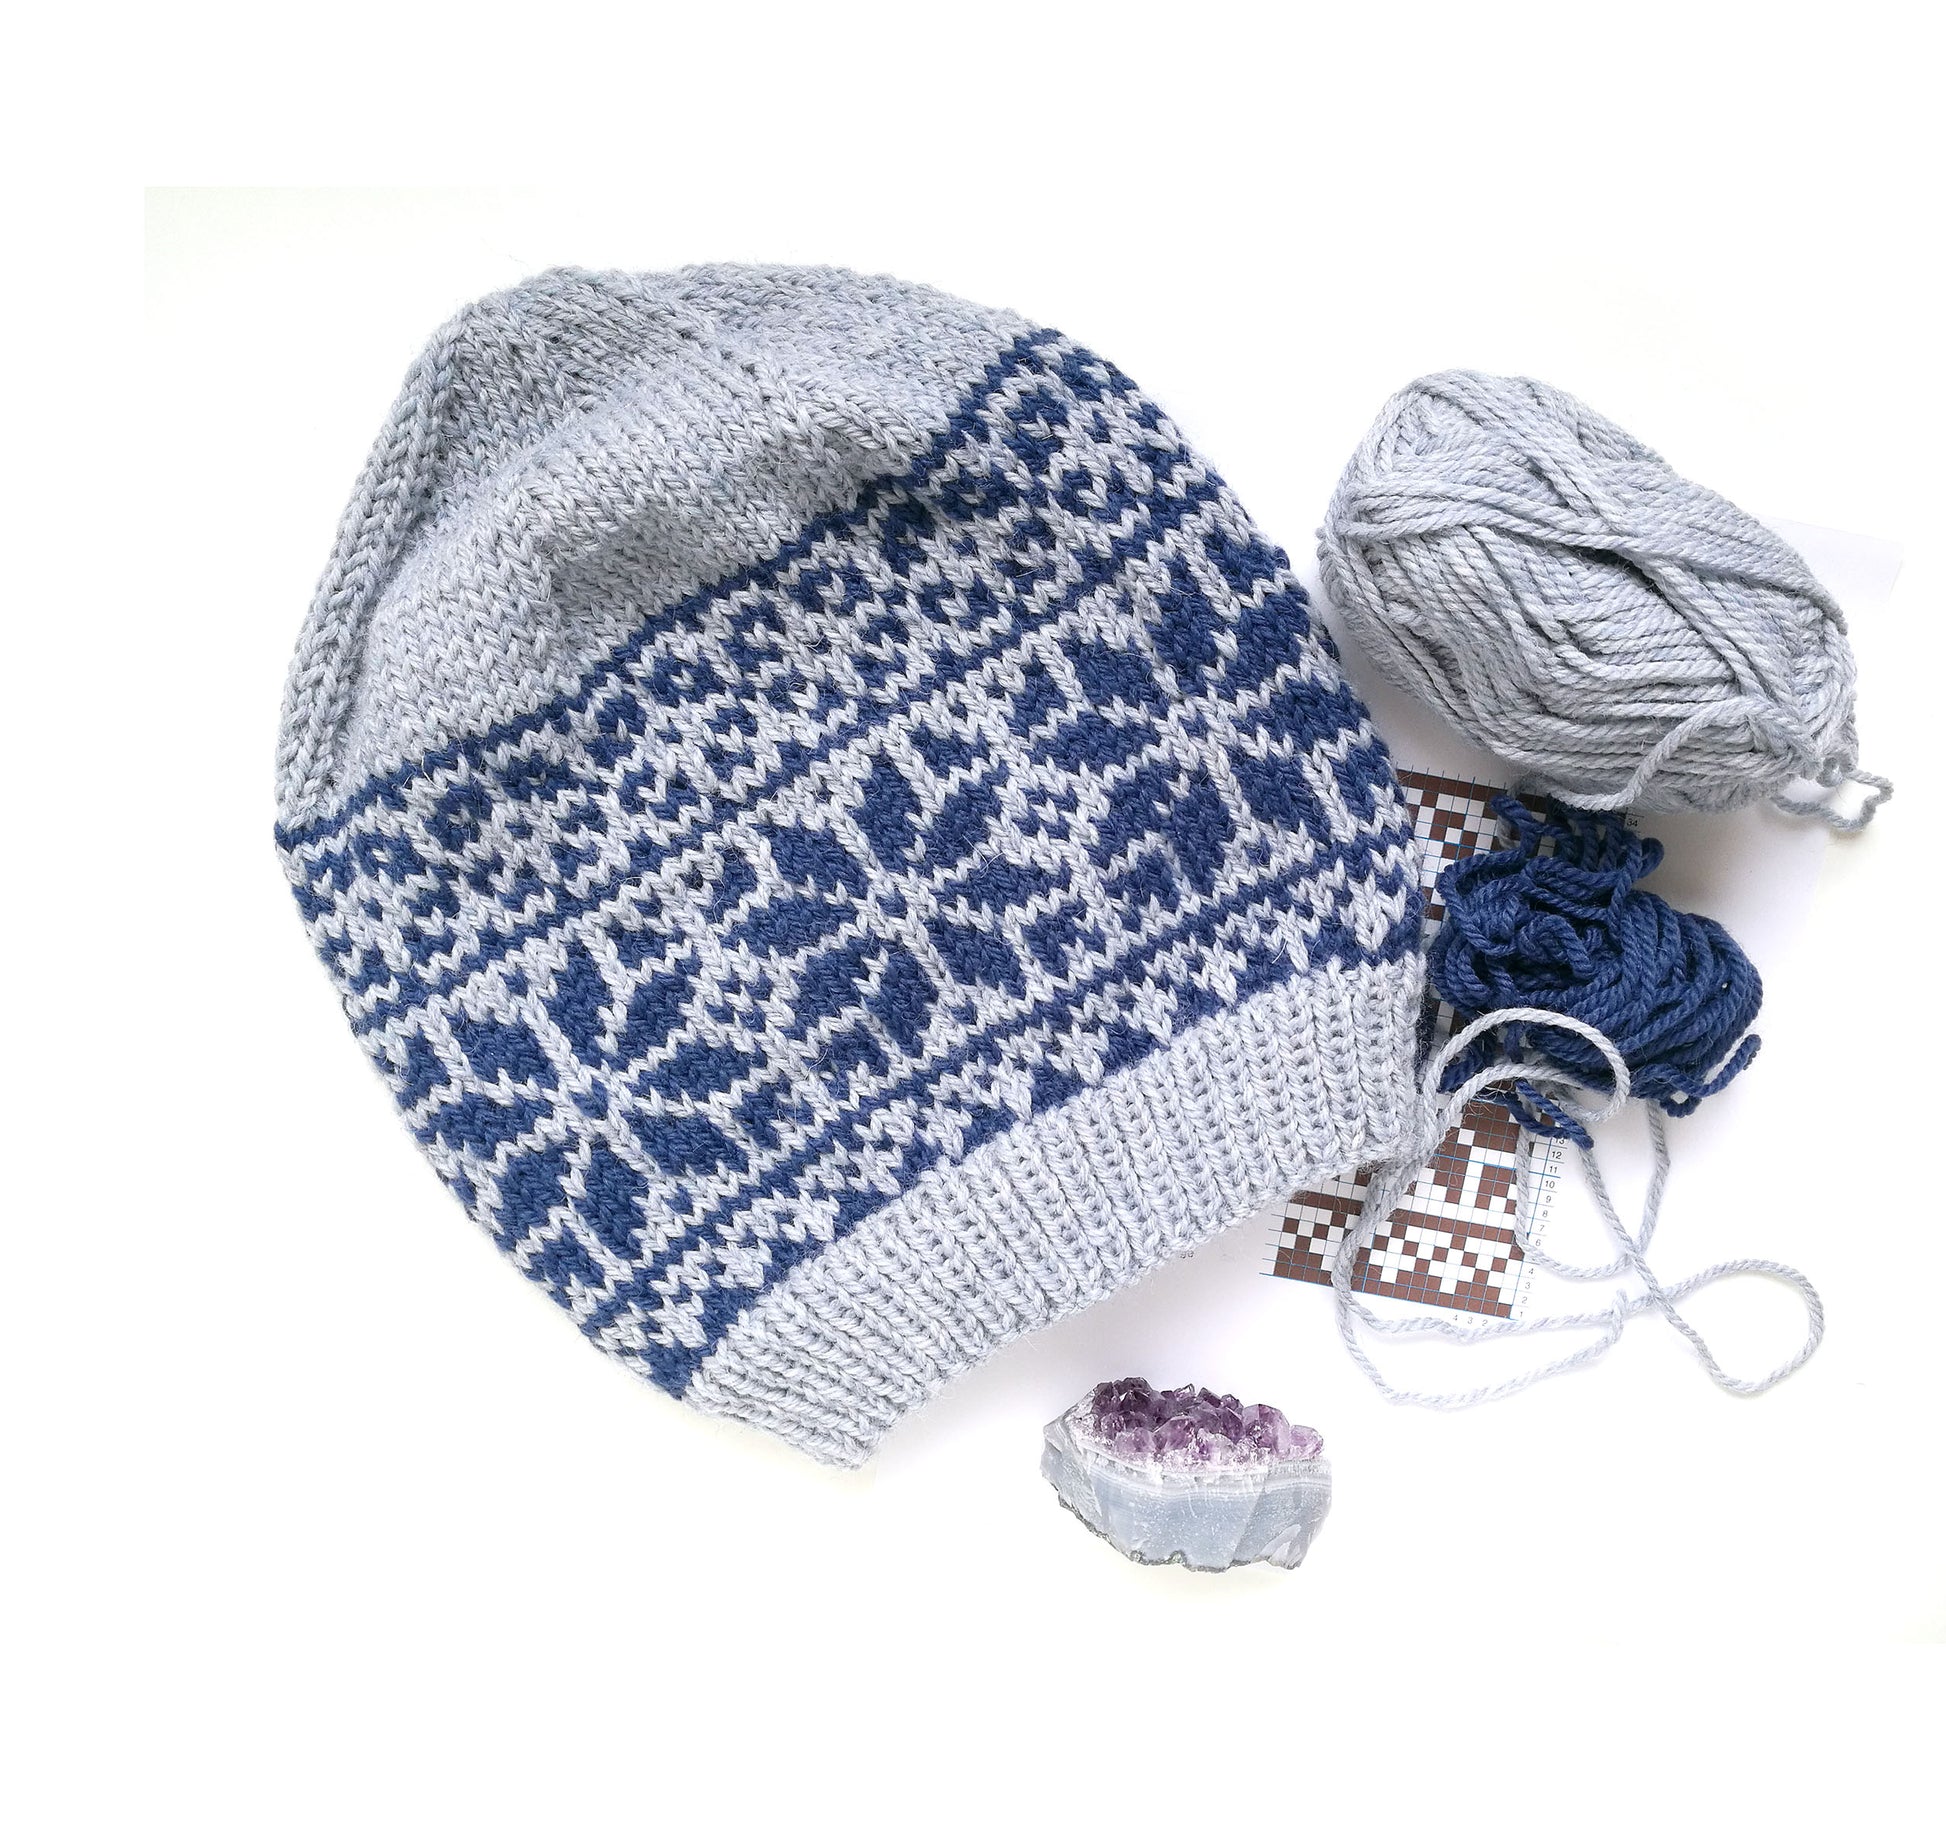 grey and blue wool hand-knitted Fair Isle beanie hat in Roses knitting pattern